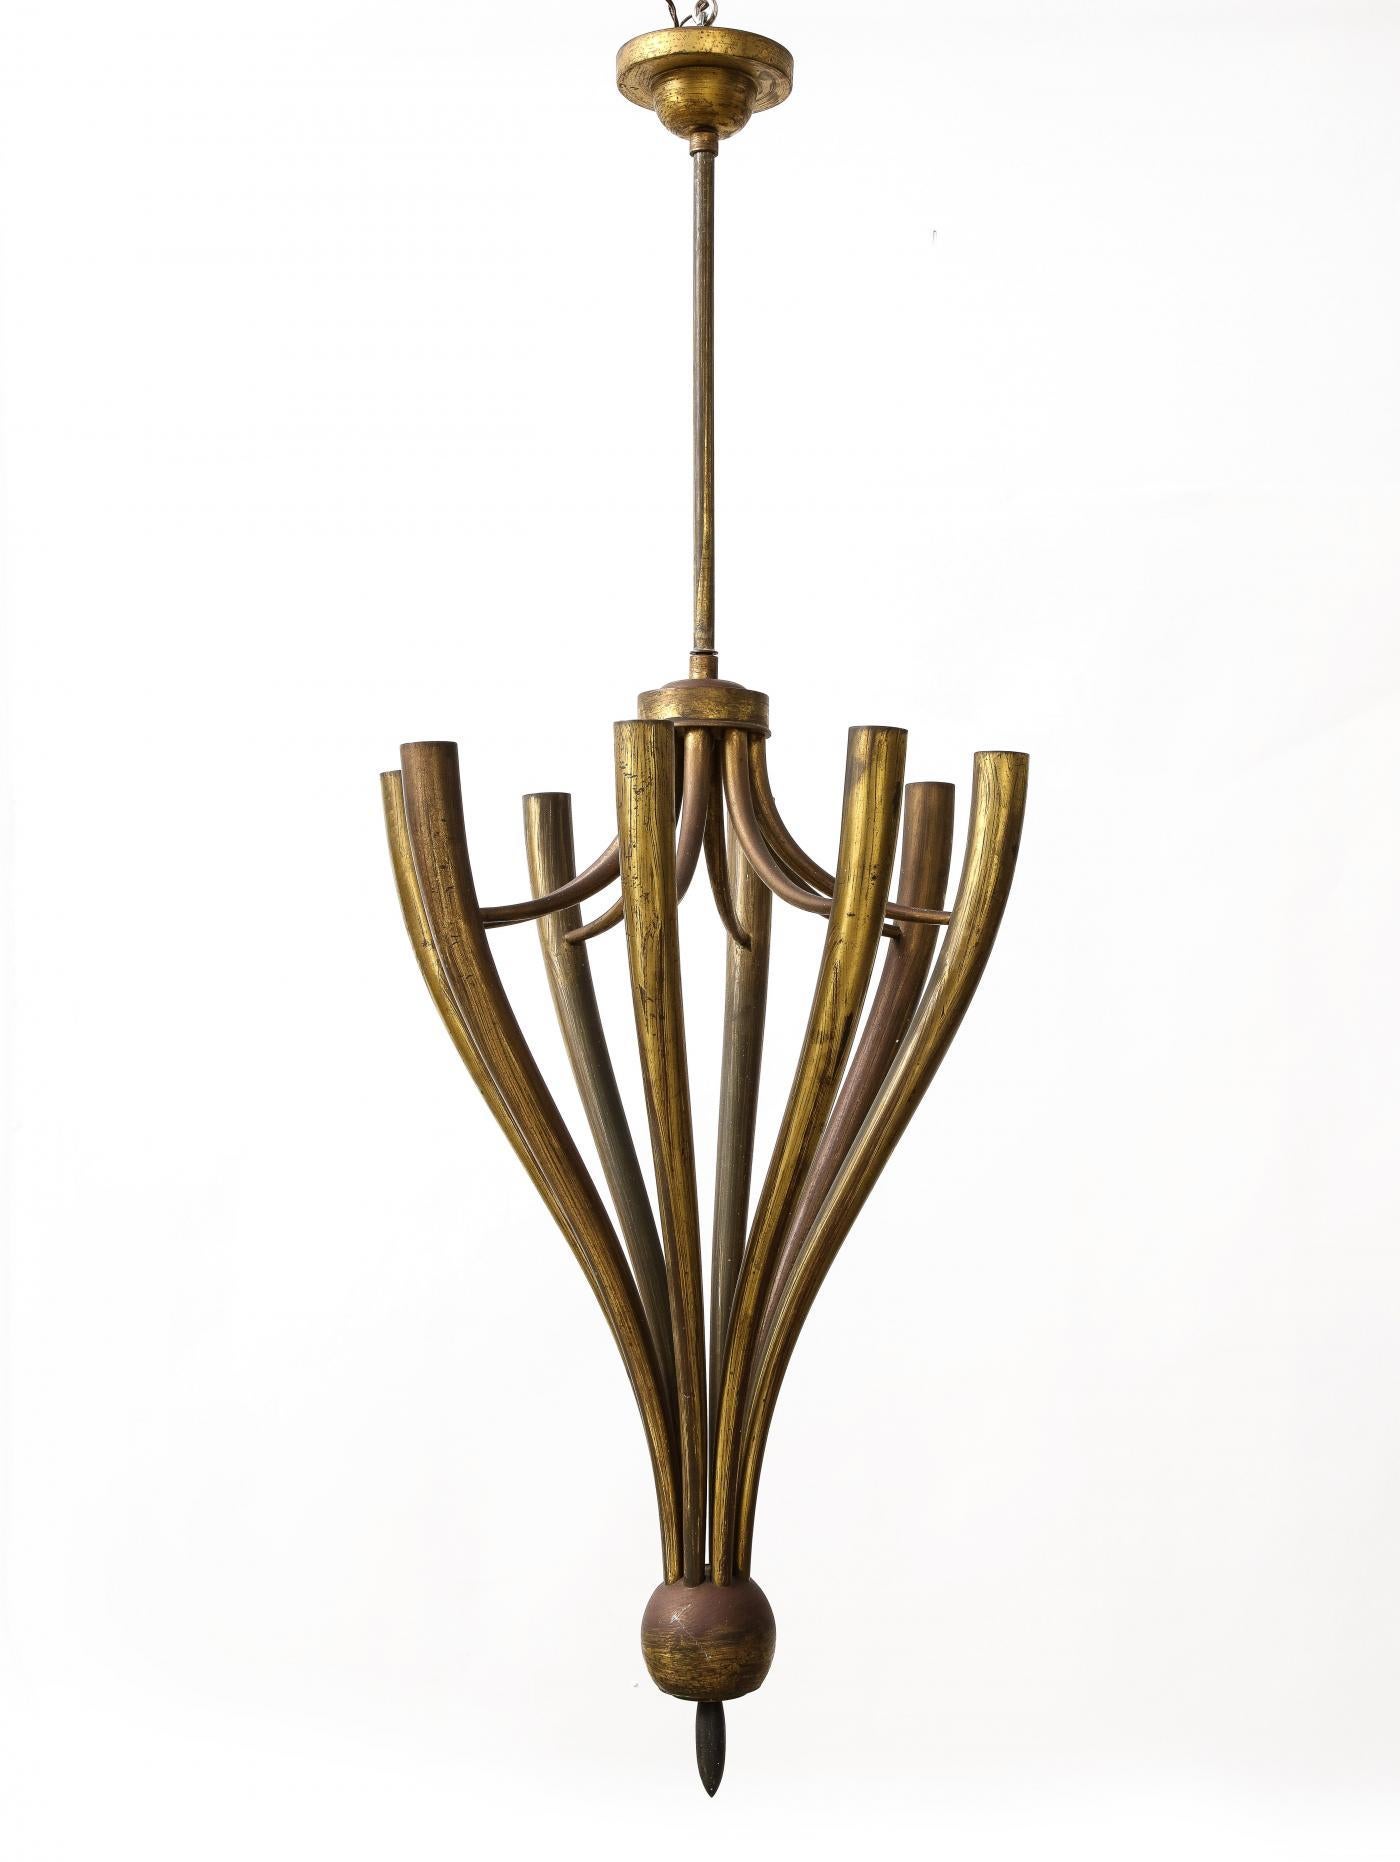 Eight-Arm Patinated Brass Chandelier by Guglielmo Ulrich, Italy, c. 1950 In Good Condition For Sale In New York City, NY